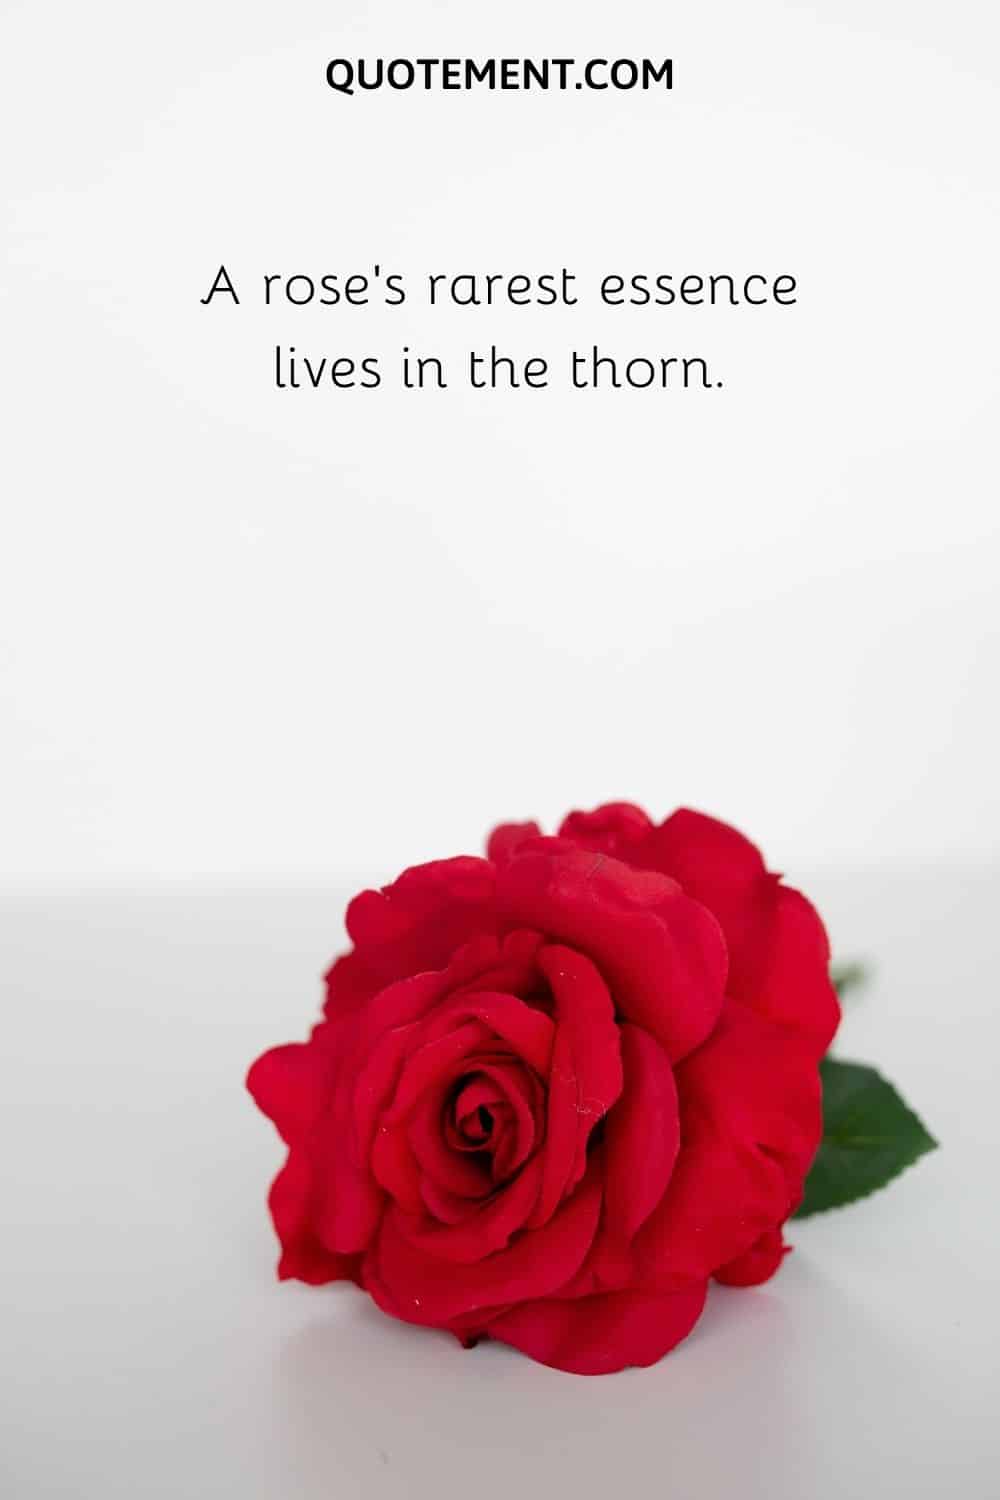 A rose’s rarest essence lives in the thorn.